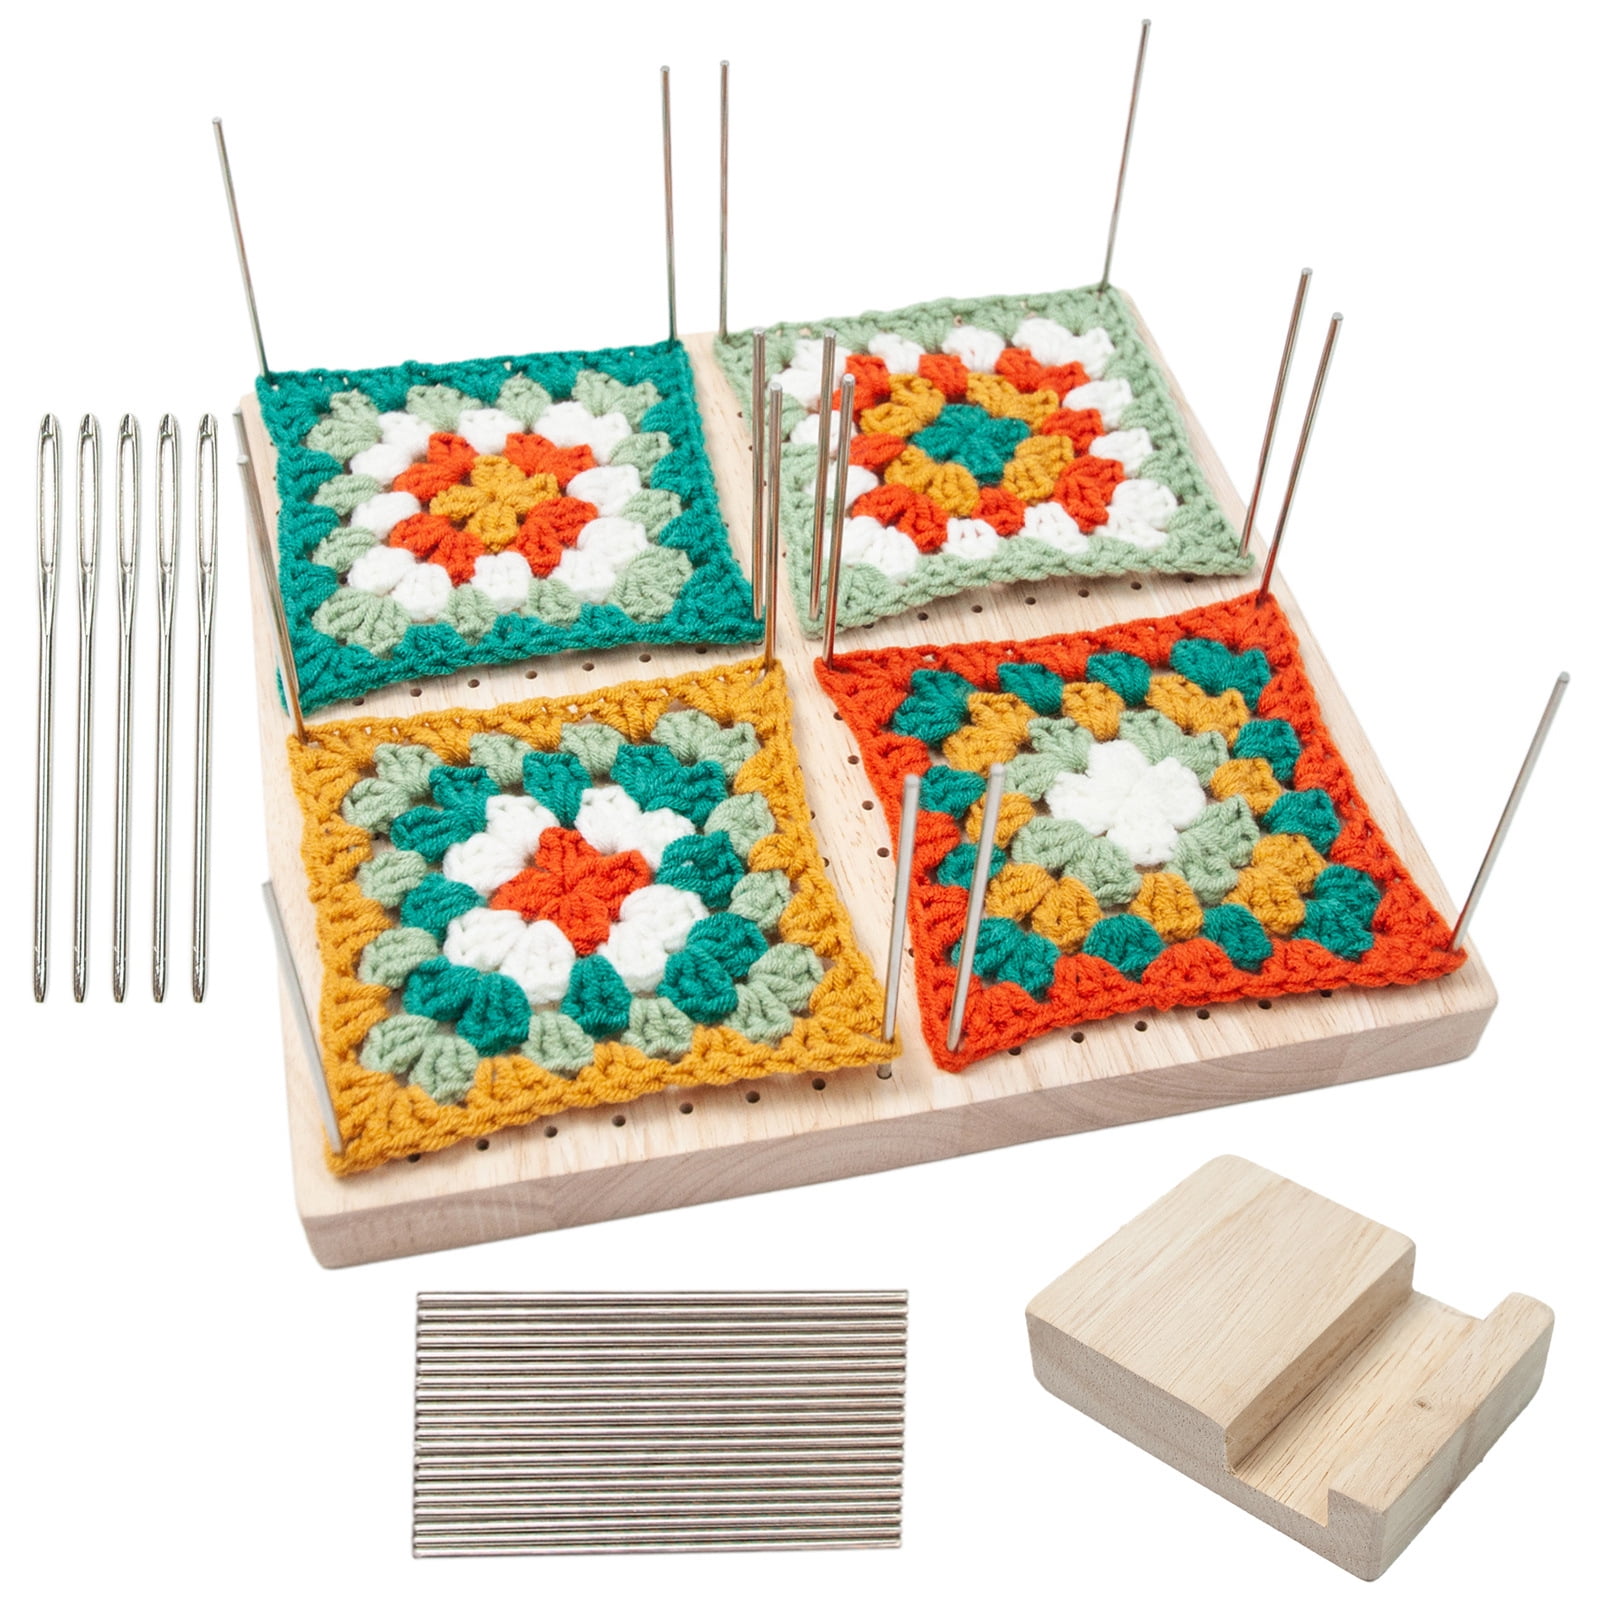 KnitIQ Blocking Mats for Knitting - Extra Thick Boards for Crochet, Lace &  Needlepoint Projects with T Pins and Storage Bag - Pack of 9 